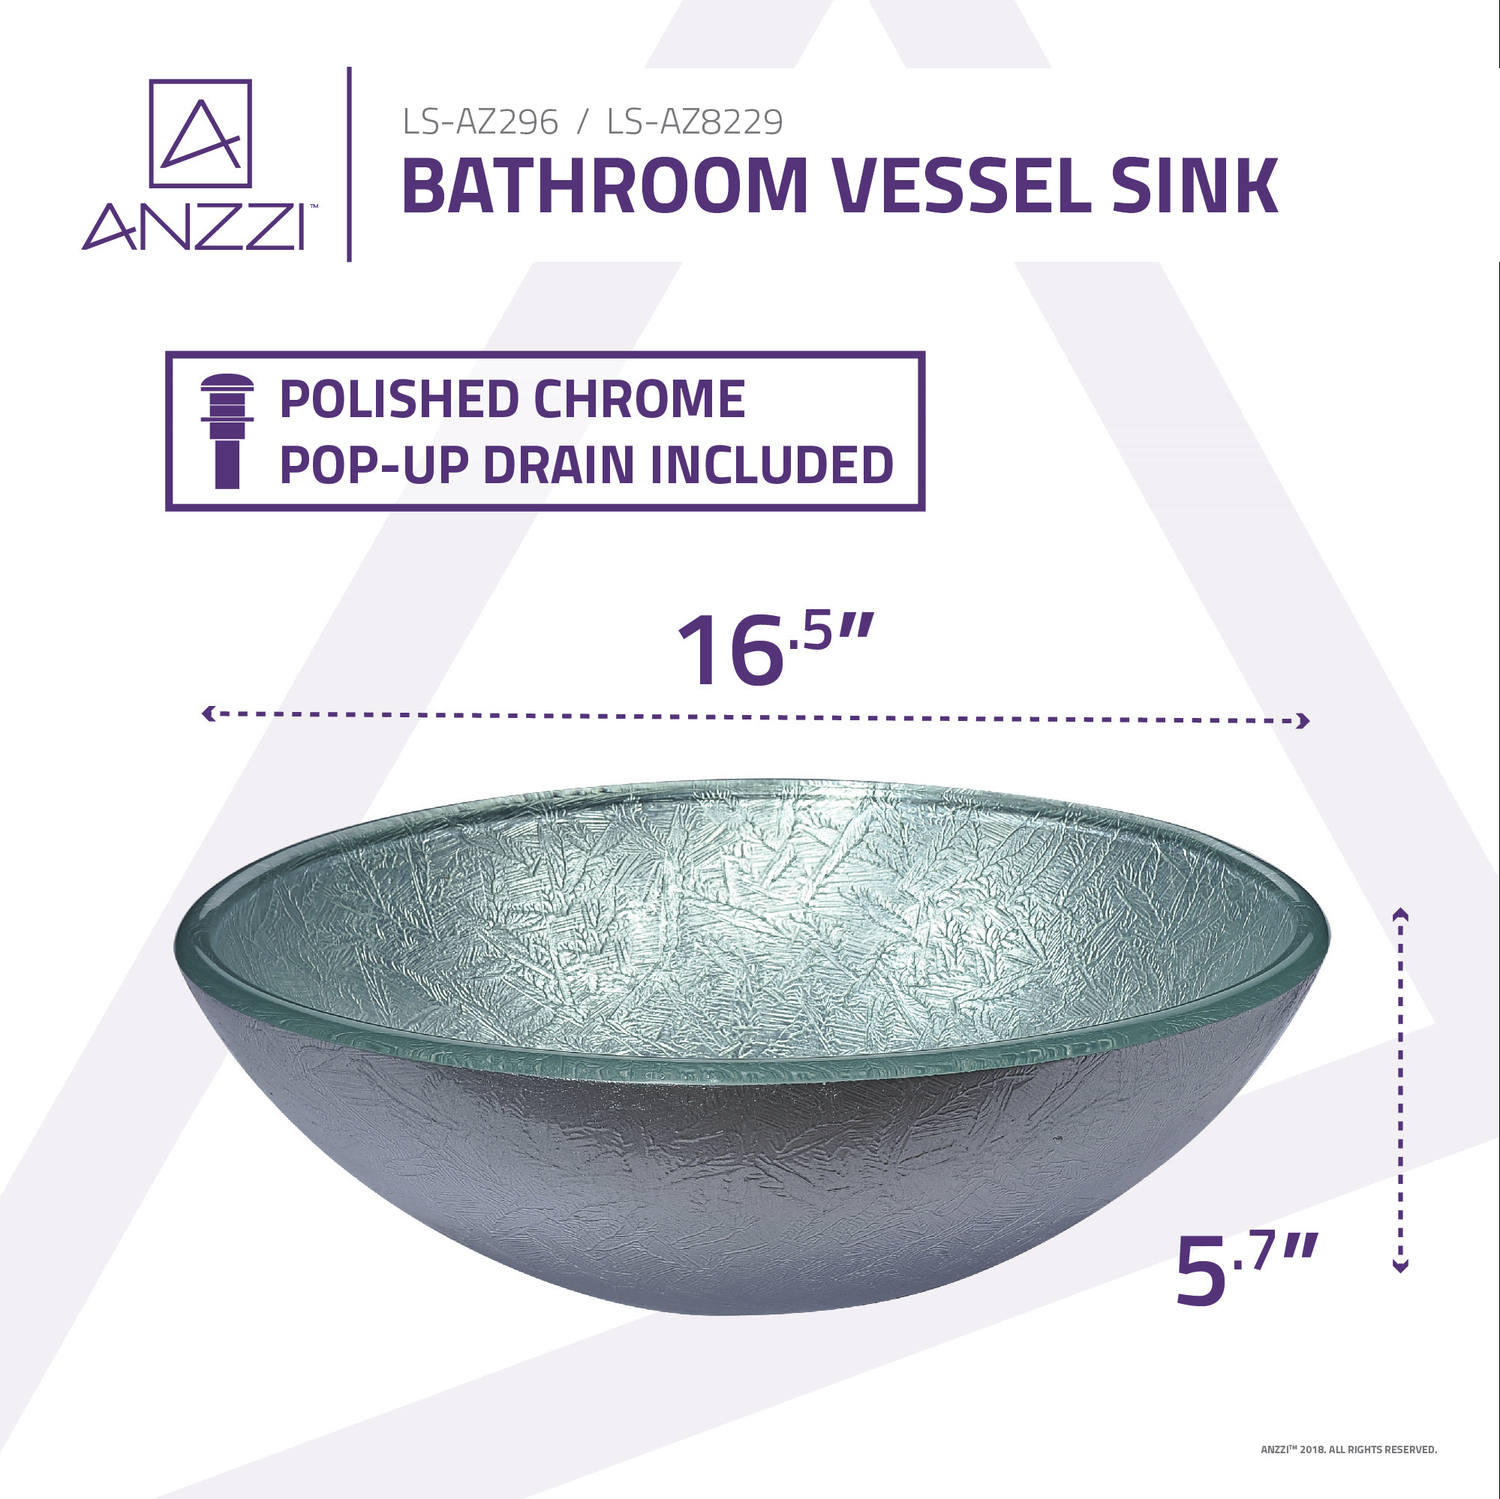 above counter vanity Anzzi BATHROOM - Sinks - Vessel - Tempered Glass Silver